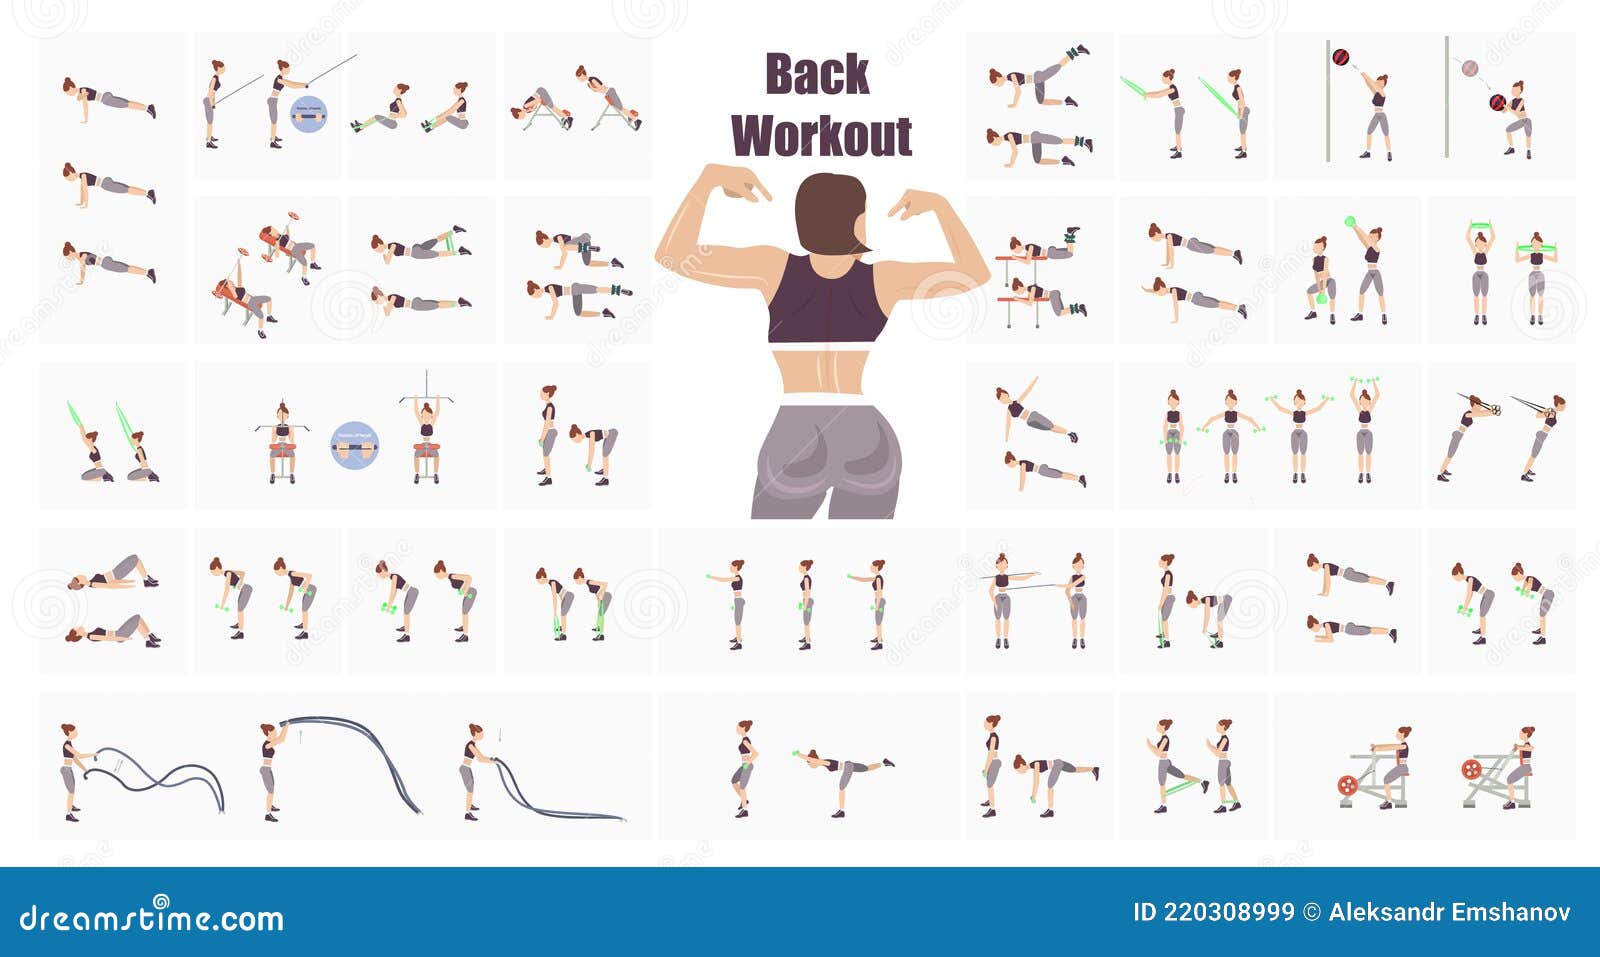 https://thumbs.dreamstime.com/z/girl-fitness-workout-fat-burning-workout-full-body-exercises-back-exercises-training-inventory-toned-body-woman-s-back-220308999.jpg